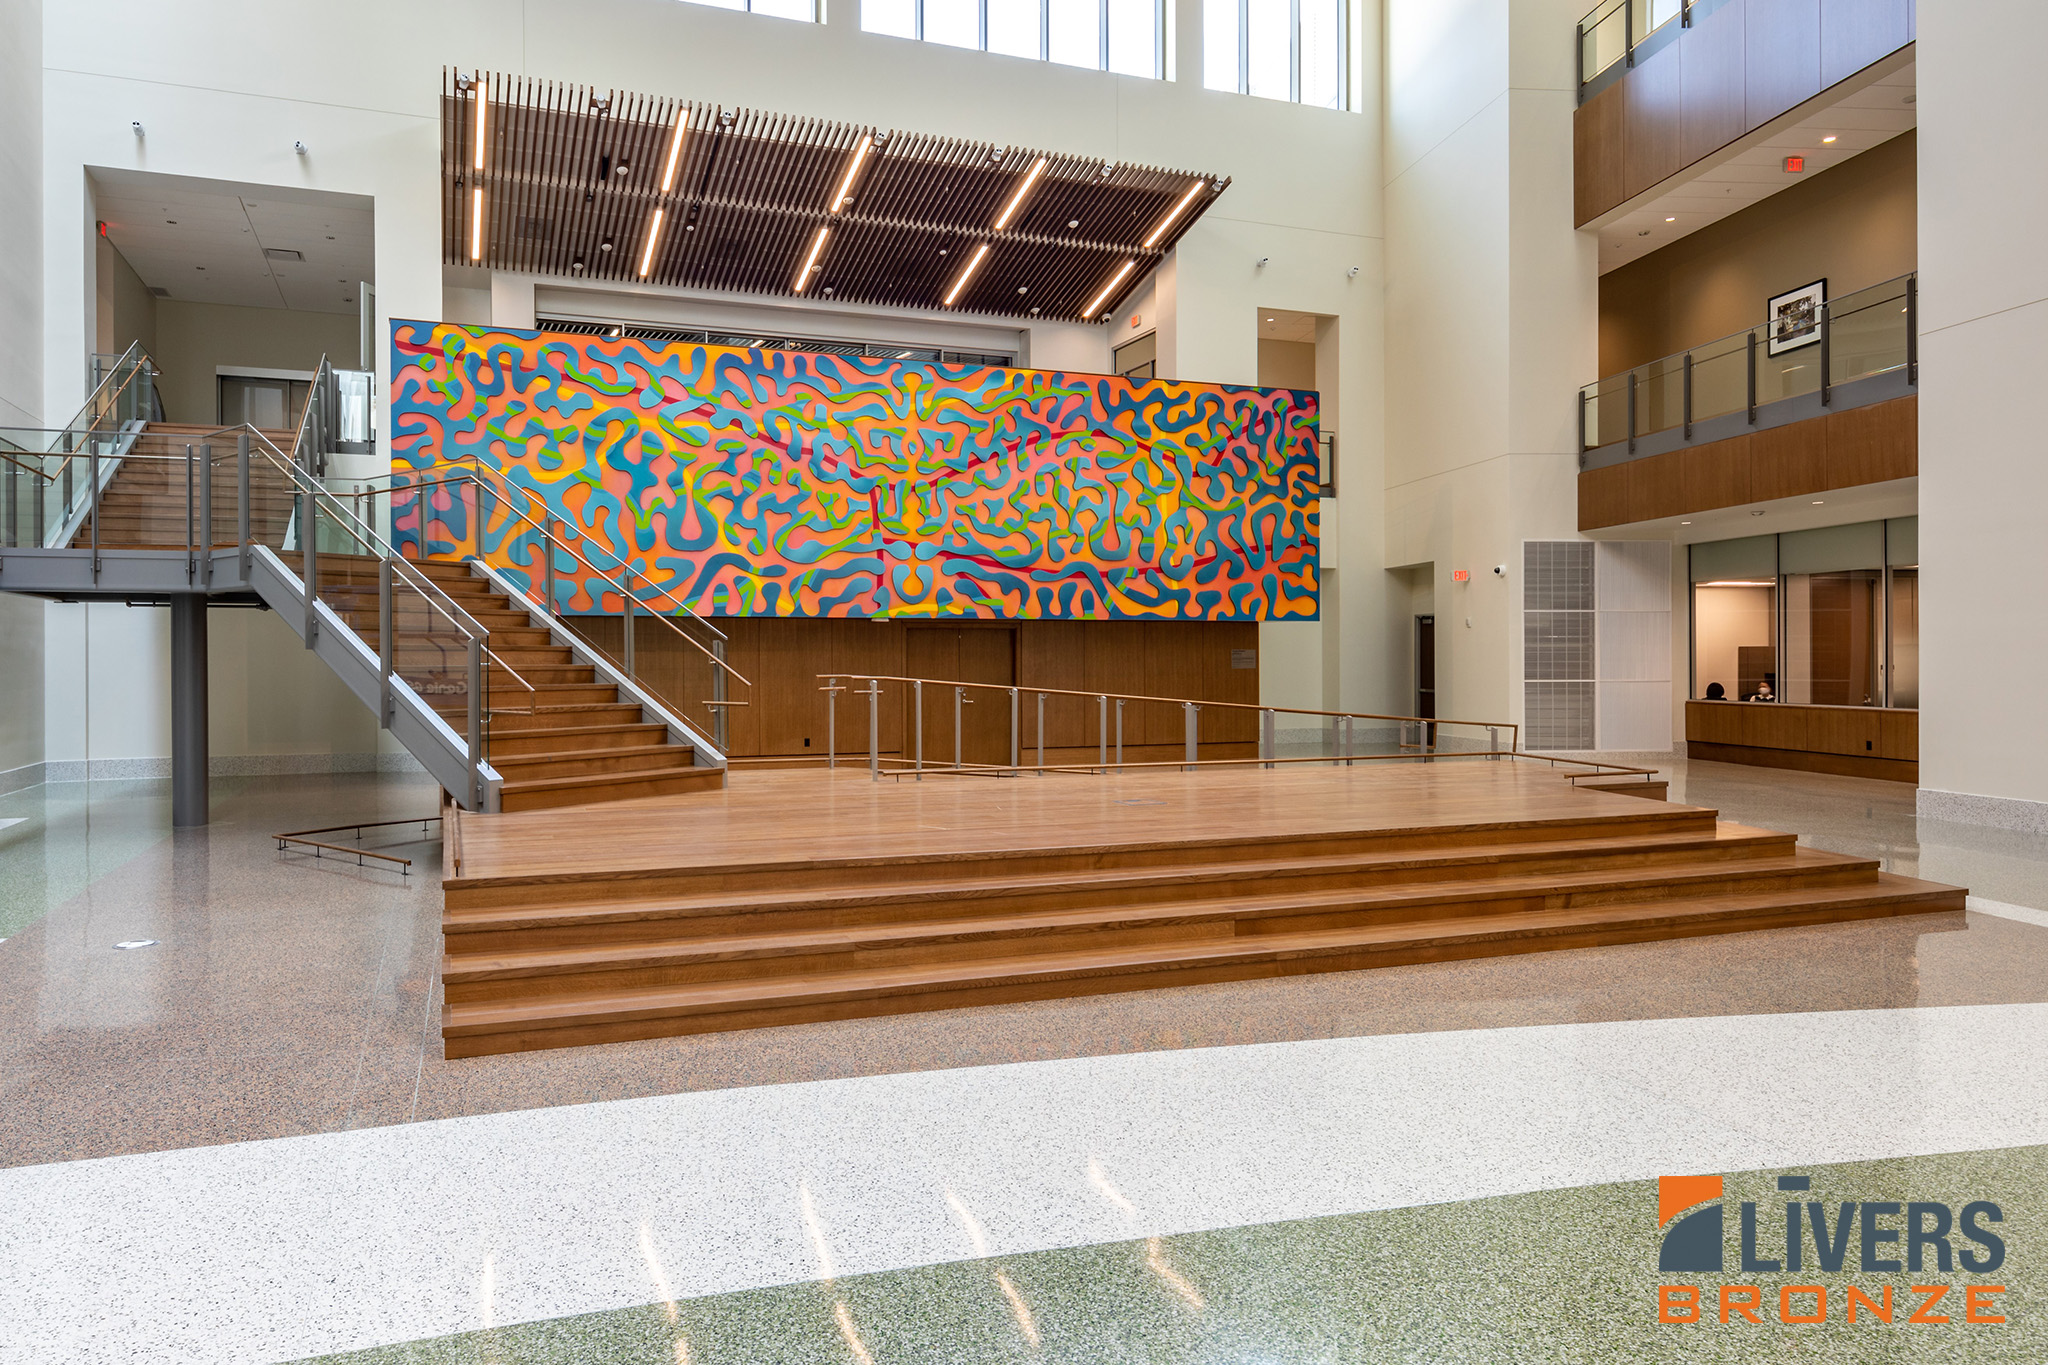 Livers Bronze Belmont Powder Coated Steel Railings were installed at the Lobby Stair and Interior Ramp at the US Court House in San Antonio Texas and were made in the USA